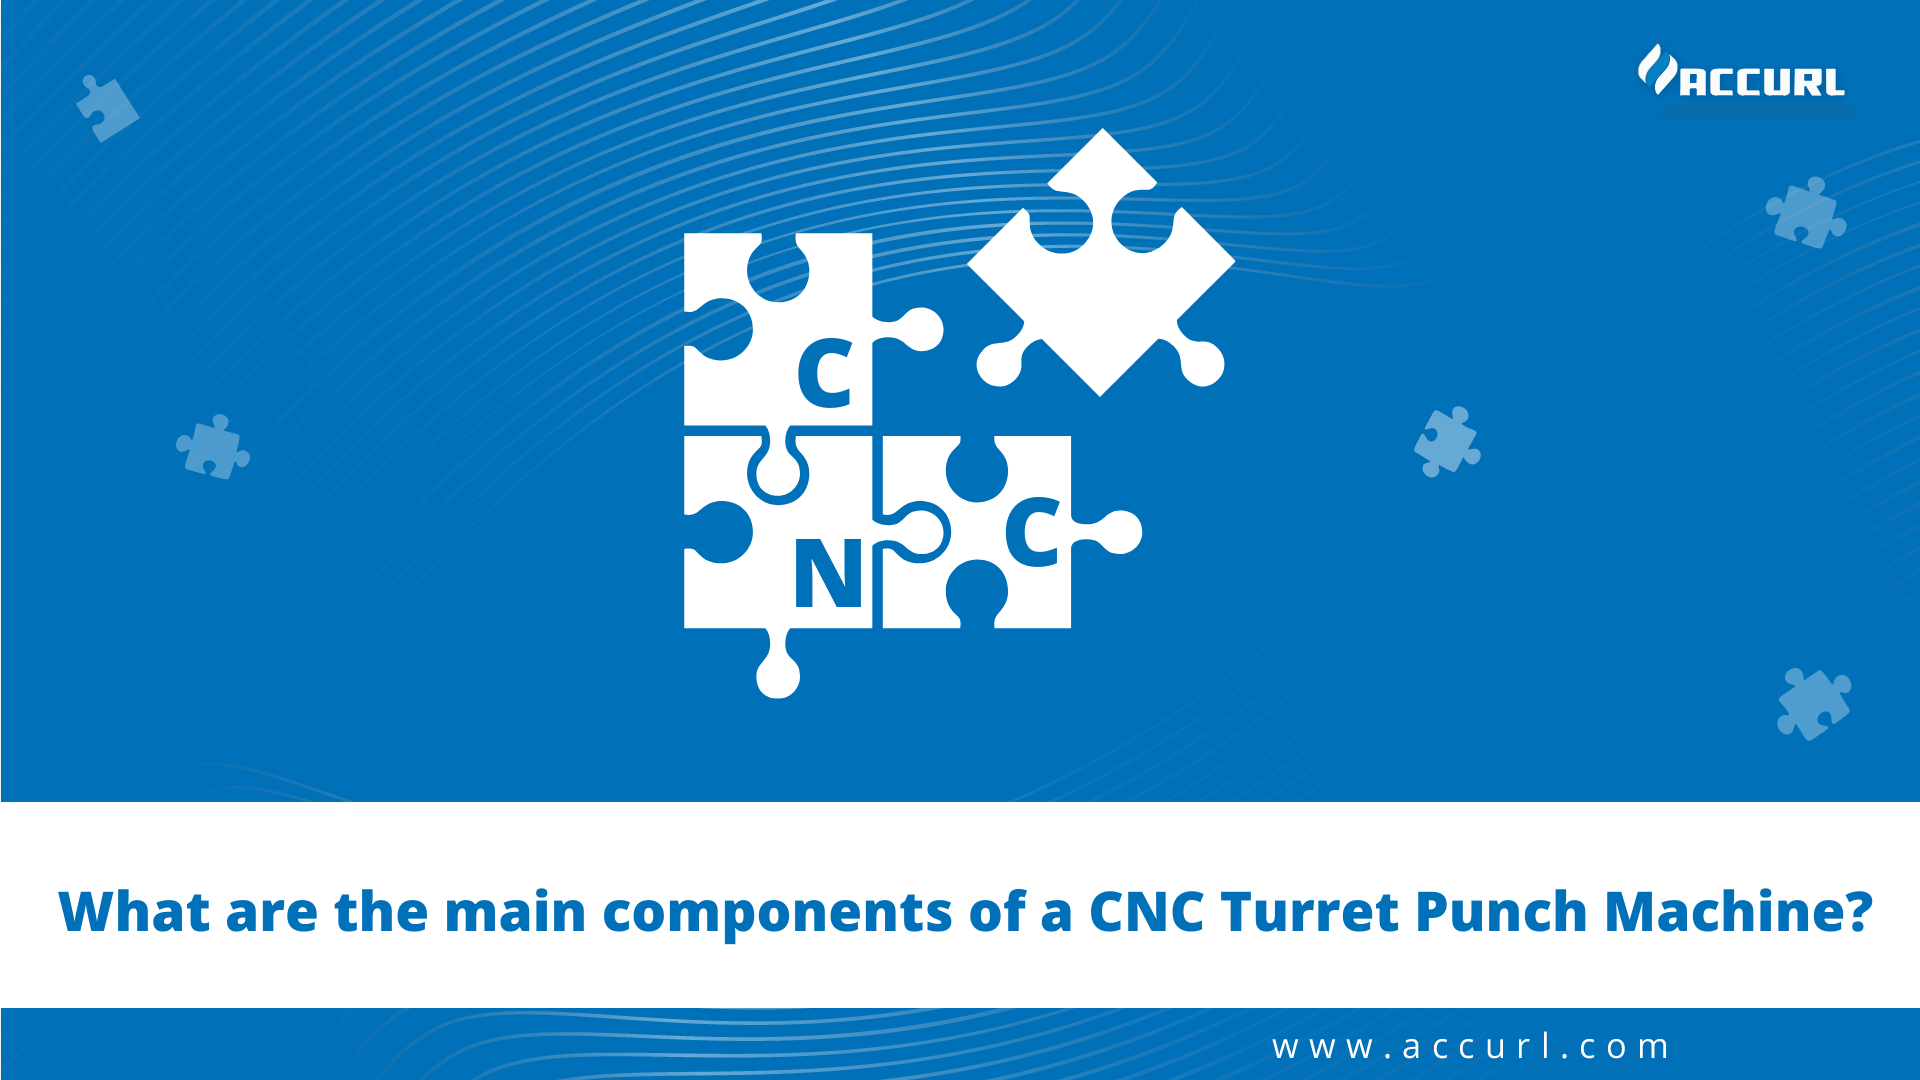 What are the main components of a CNC turret punch machine?